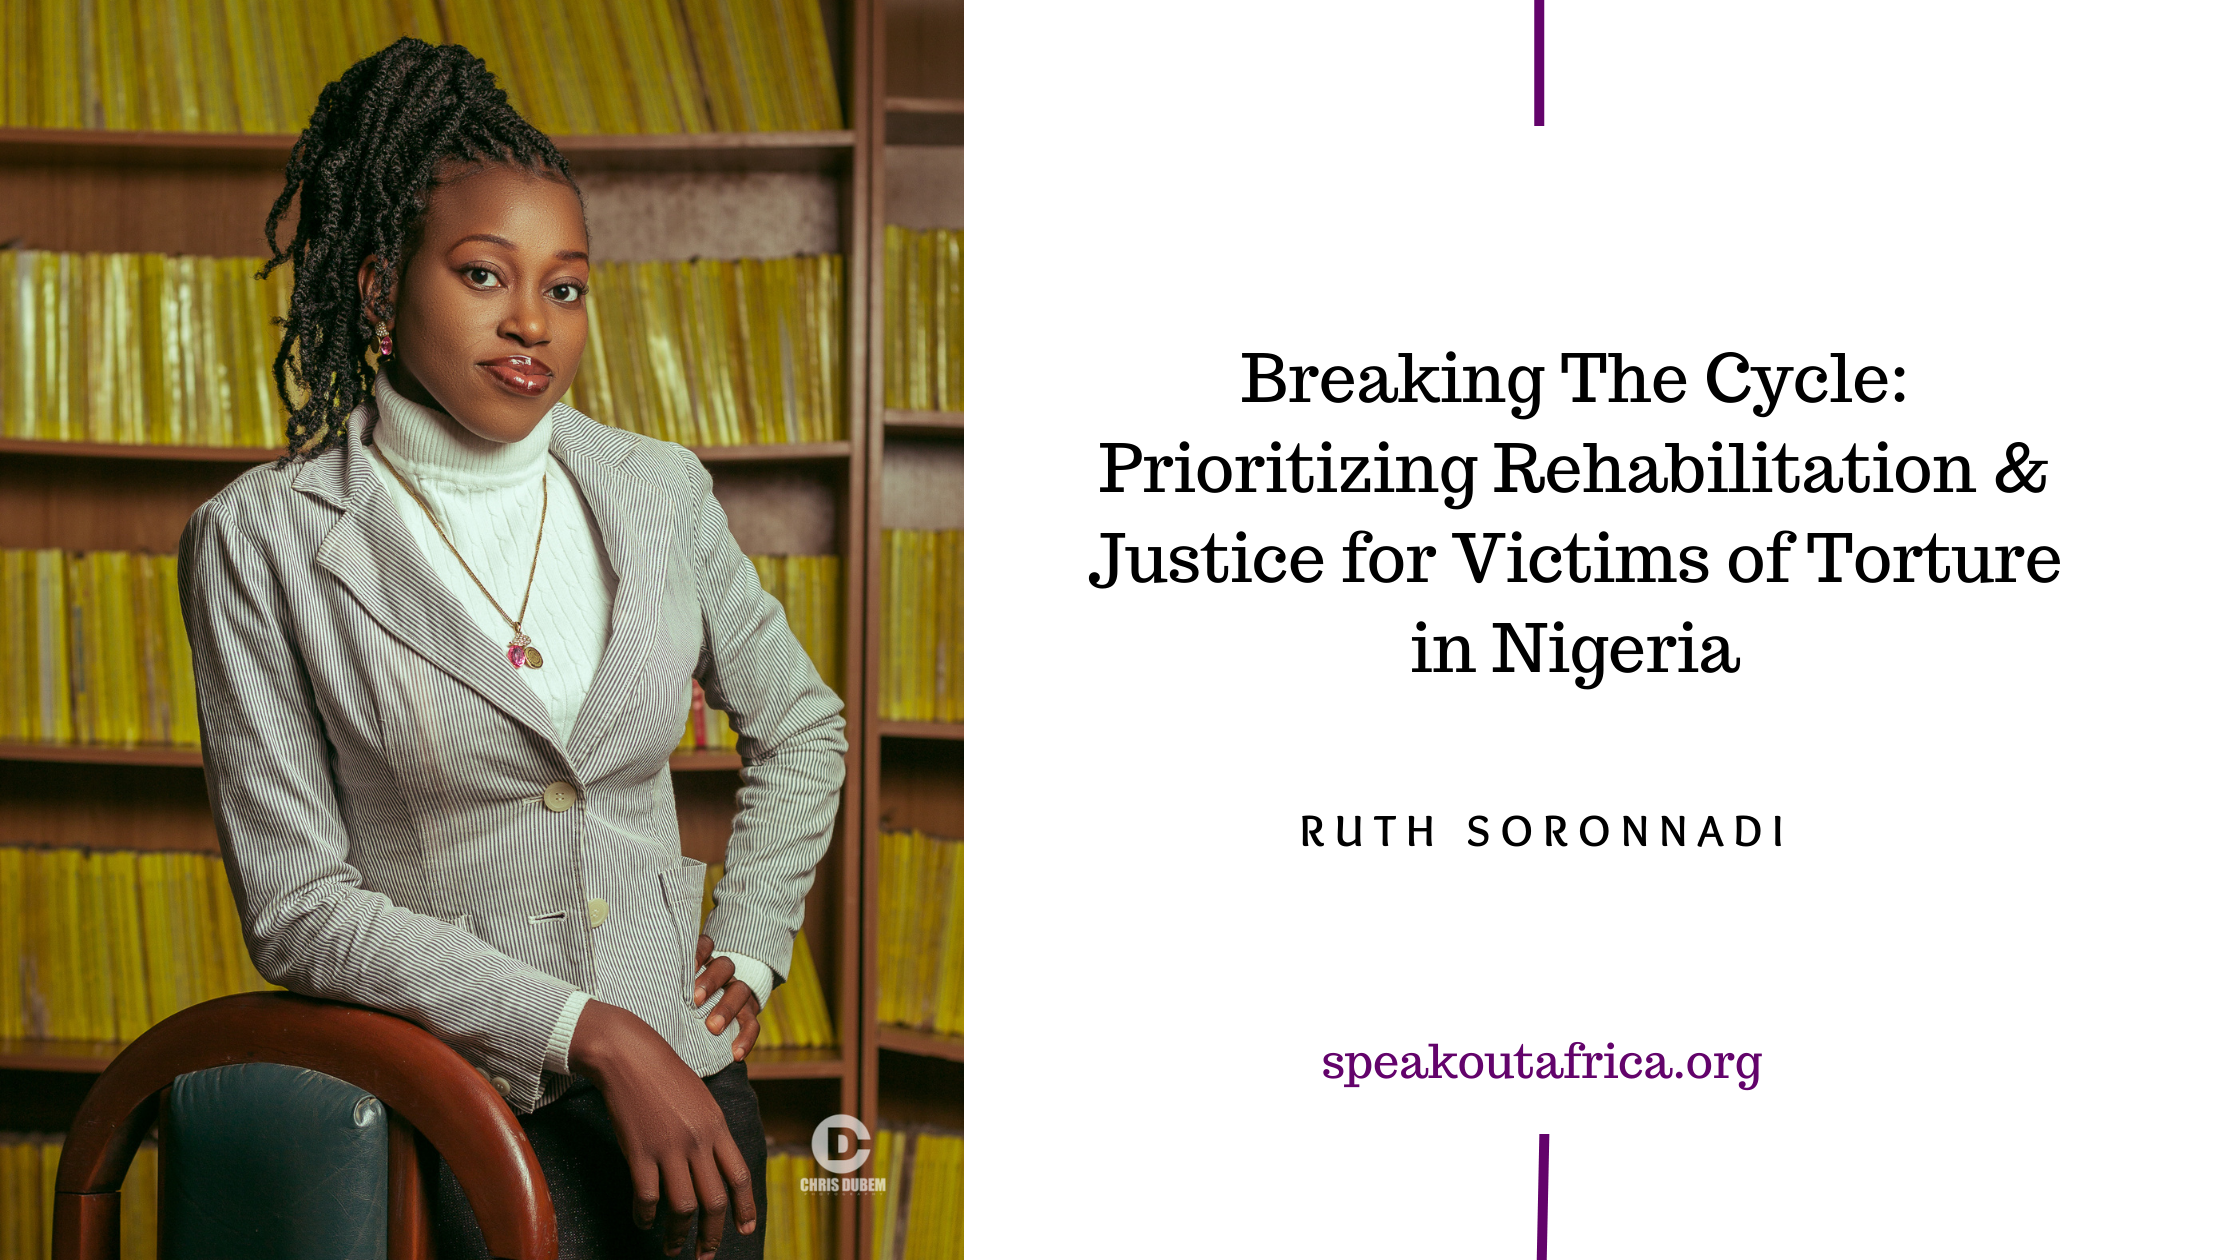 Breaking The Cycle: Prioritizing Rehabilitation & Justice for Victims of Torture in Nigeria